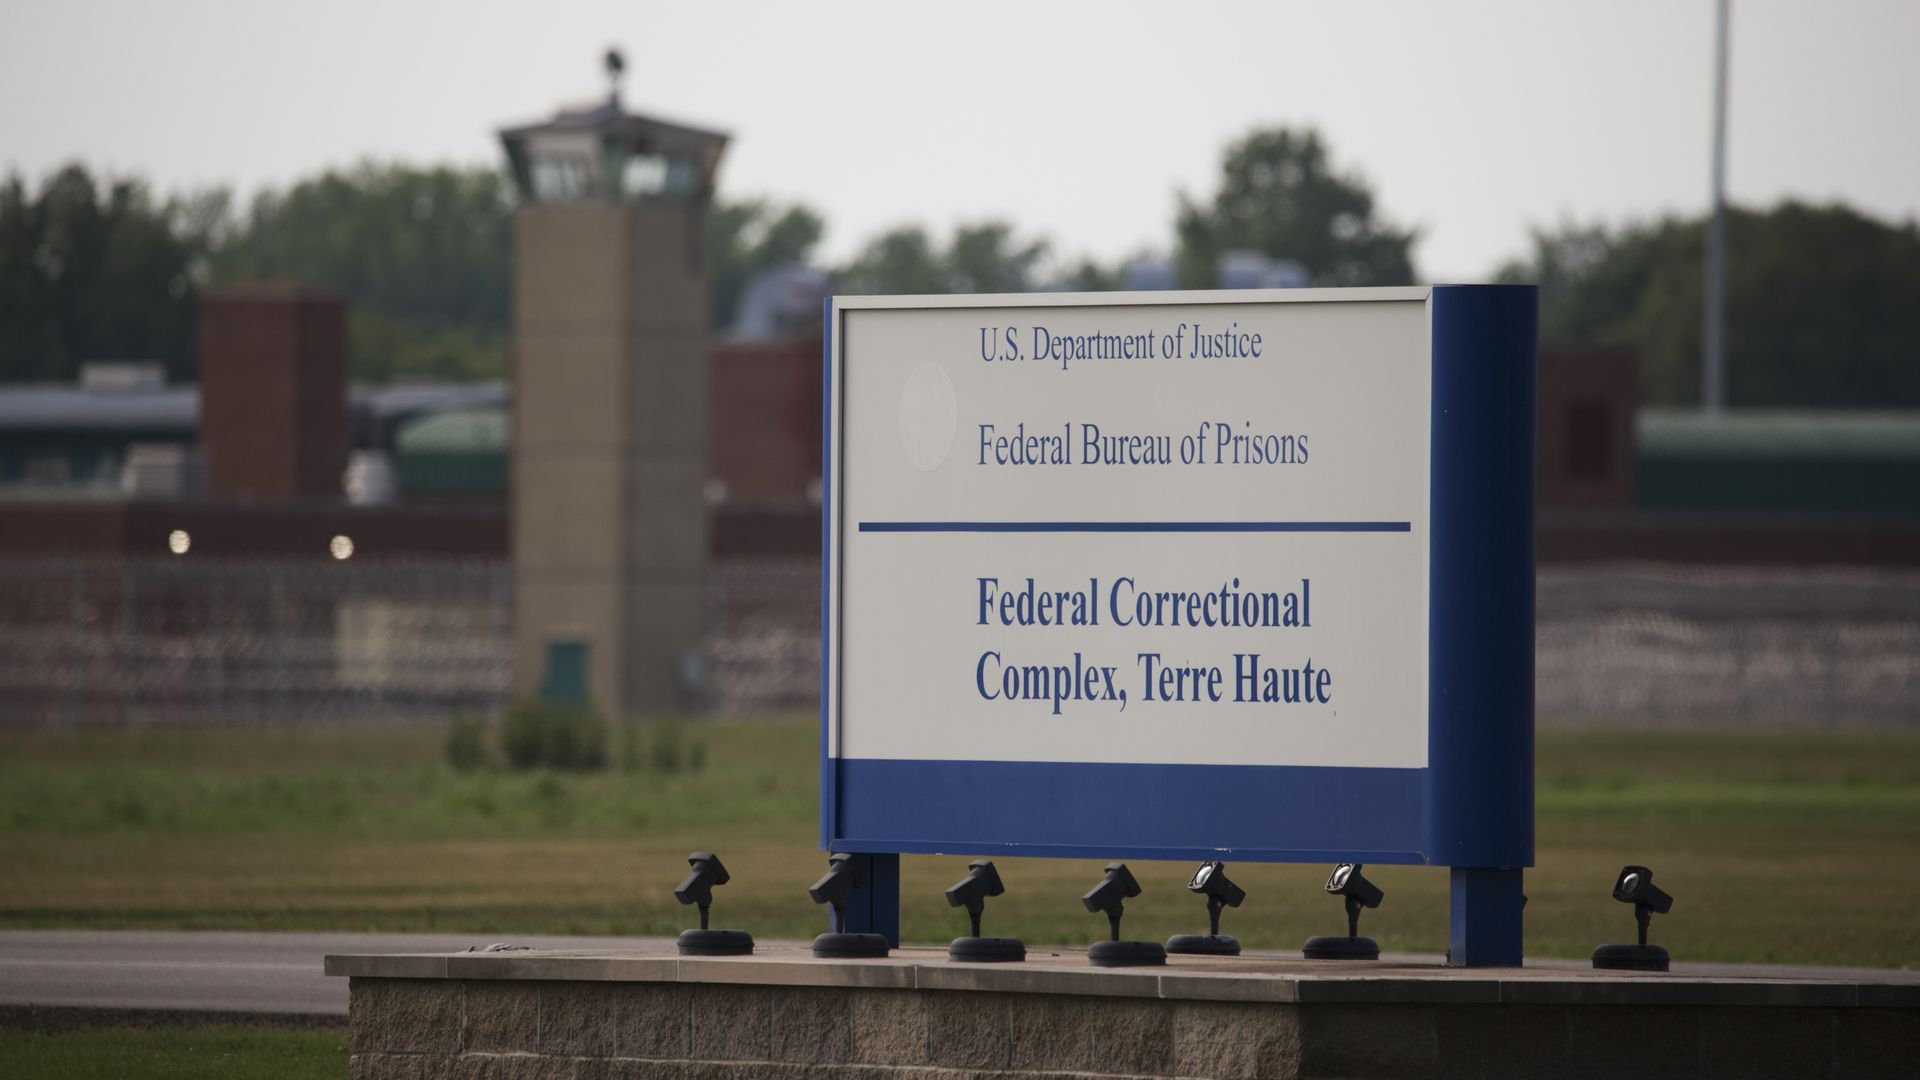 The Terre Haute Federal Correctional Complex in Indiana where Lisa Montgomery was scheduled to be executed.